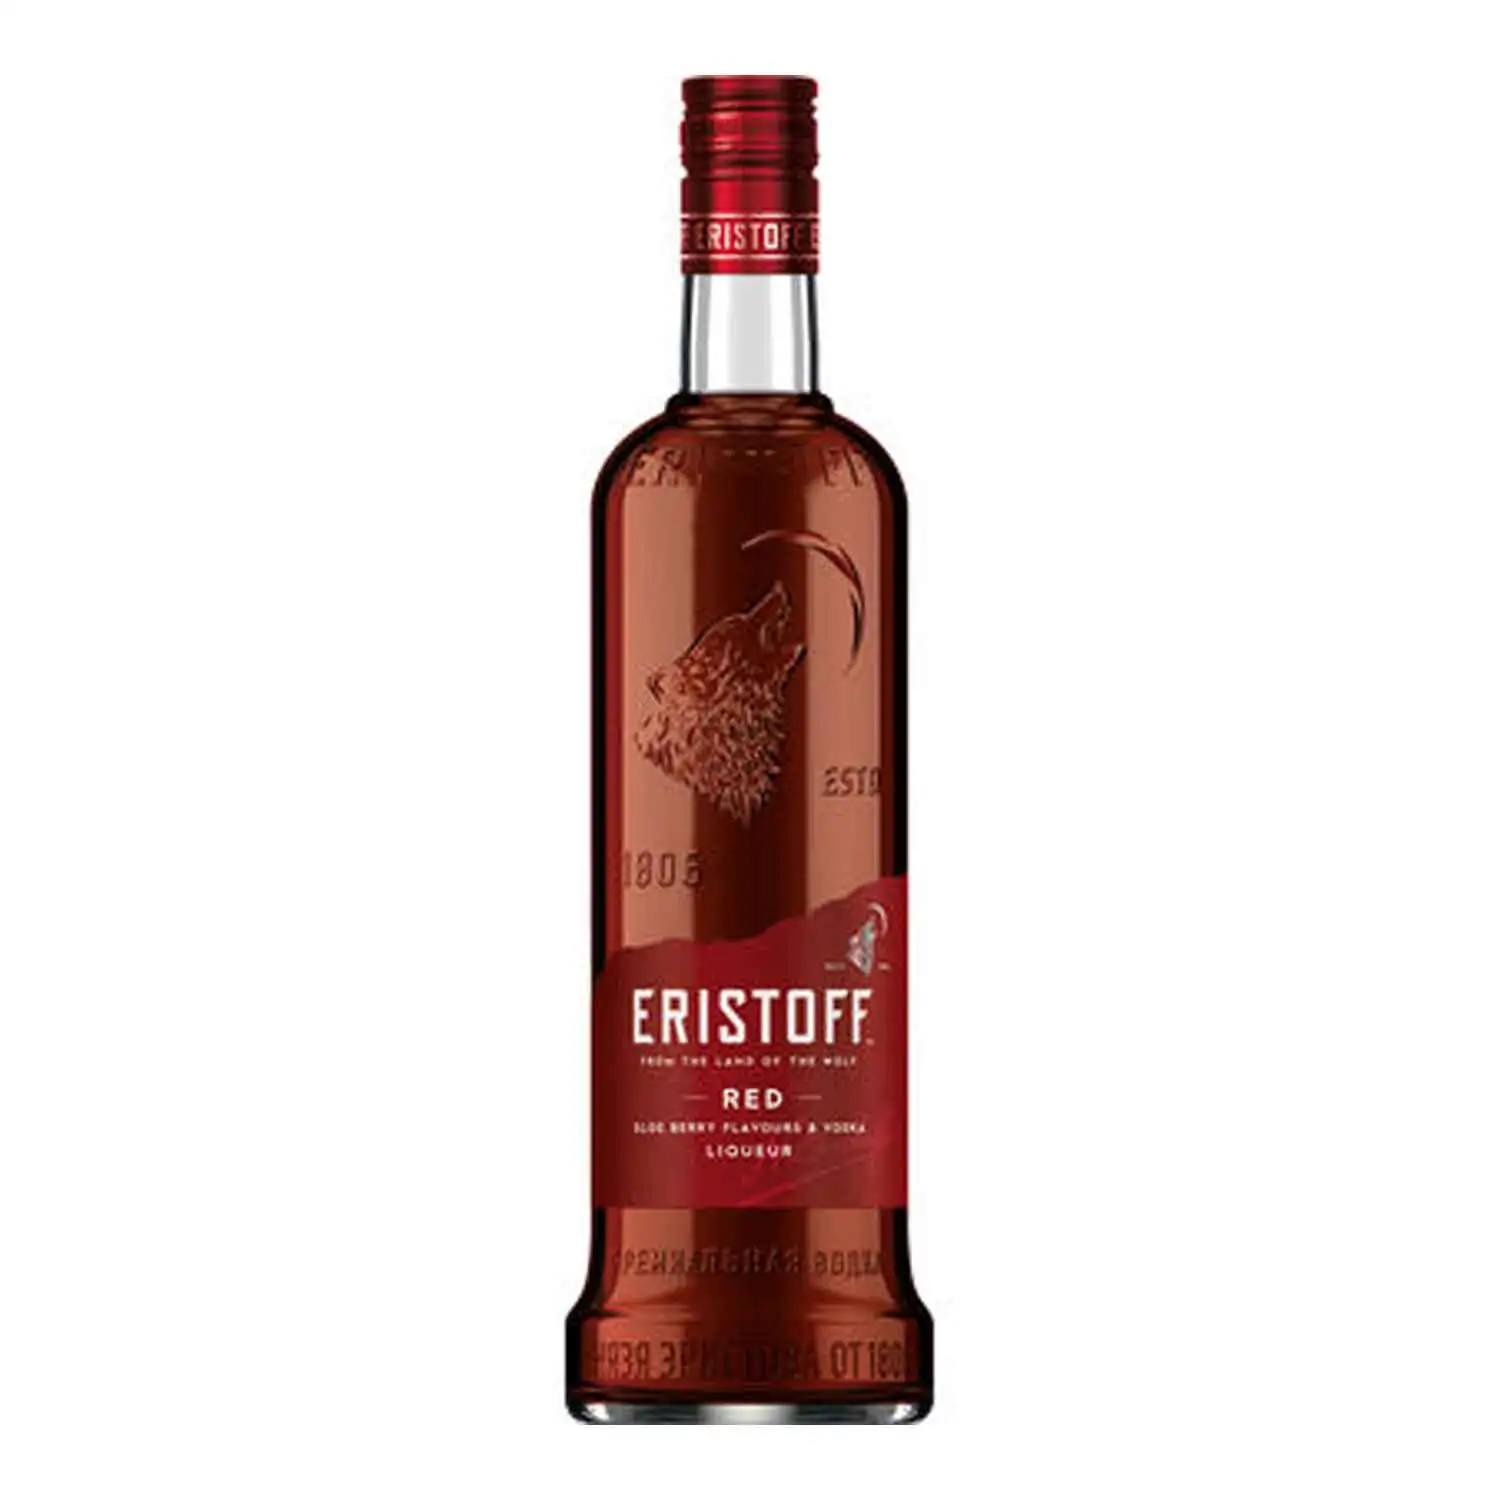 Eristoff red 70cl Alc 18% - Buy at Real Tobacco